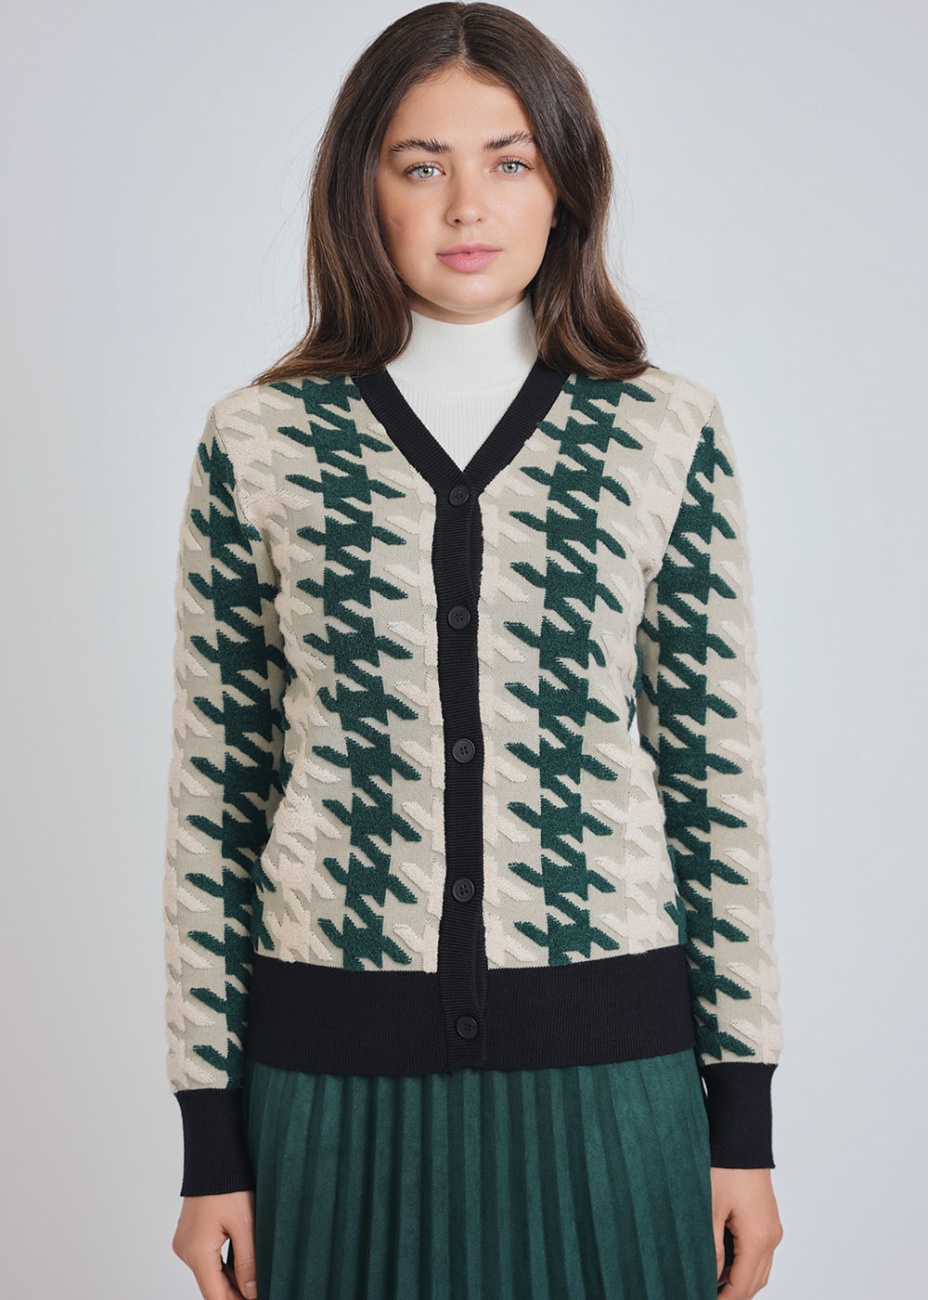 Green & White Cardigan with Classic Print